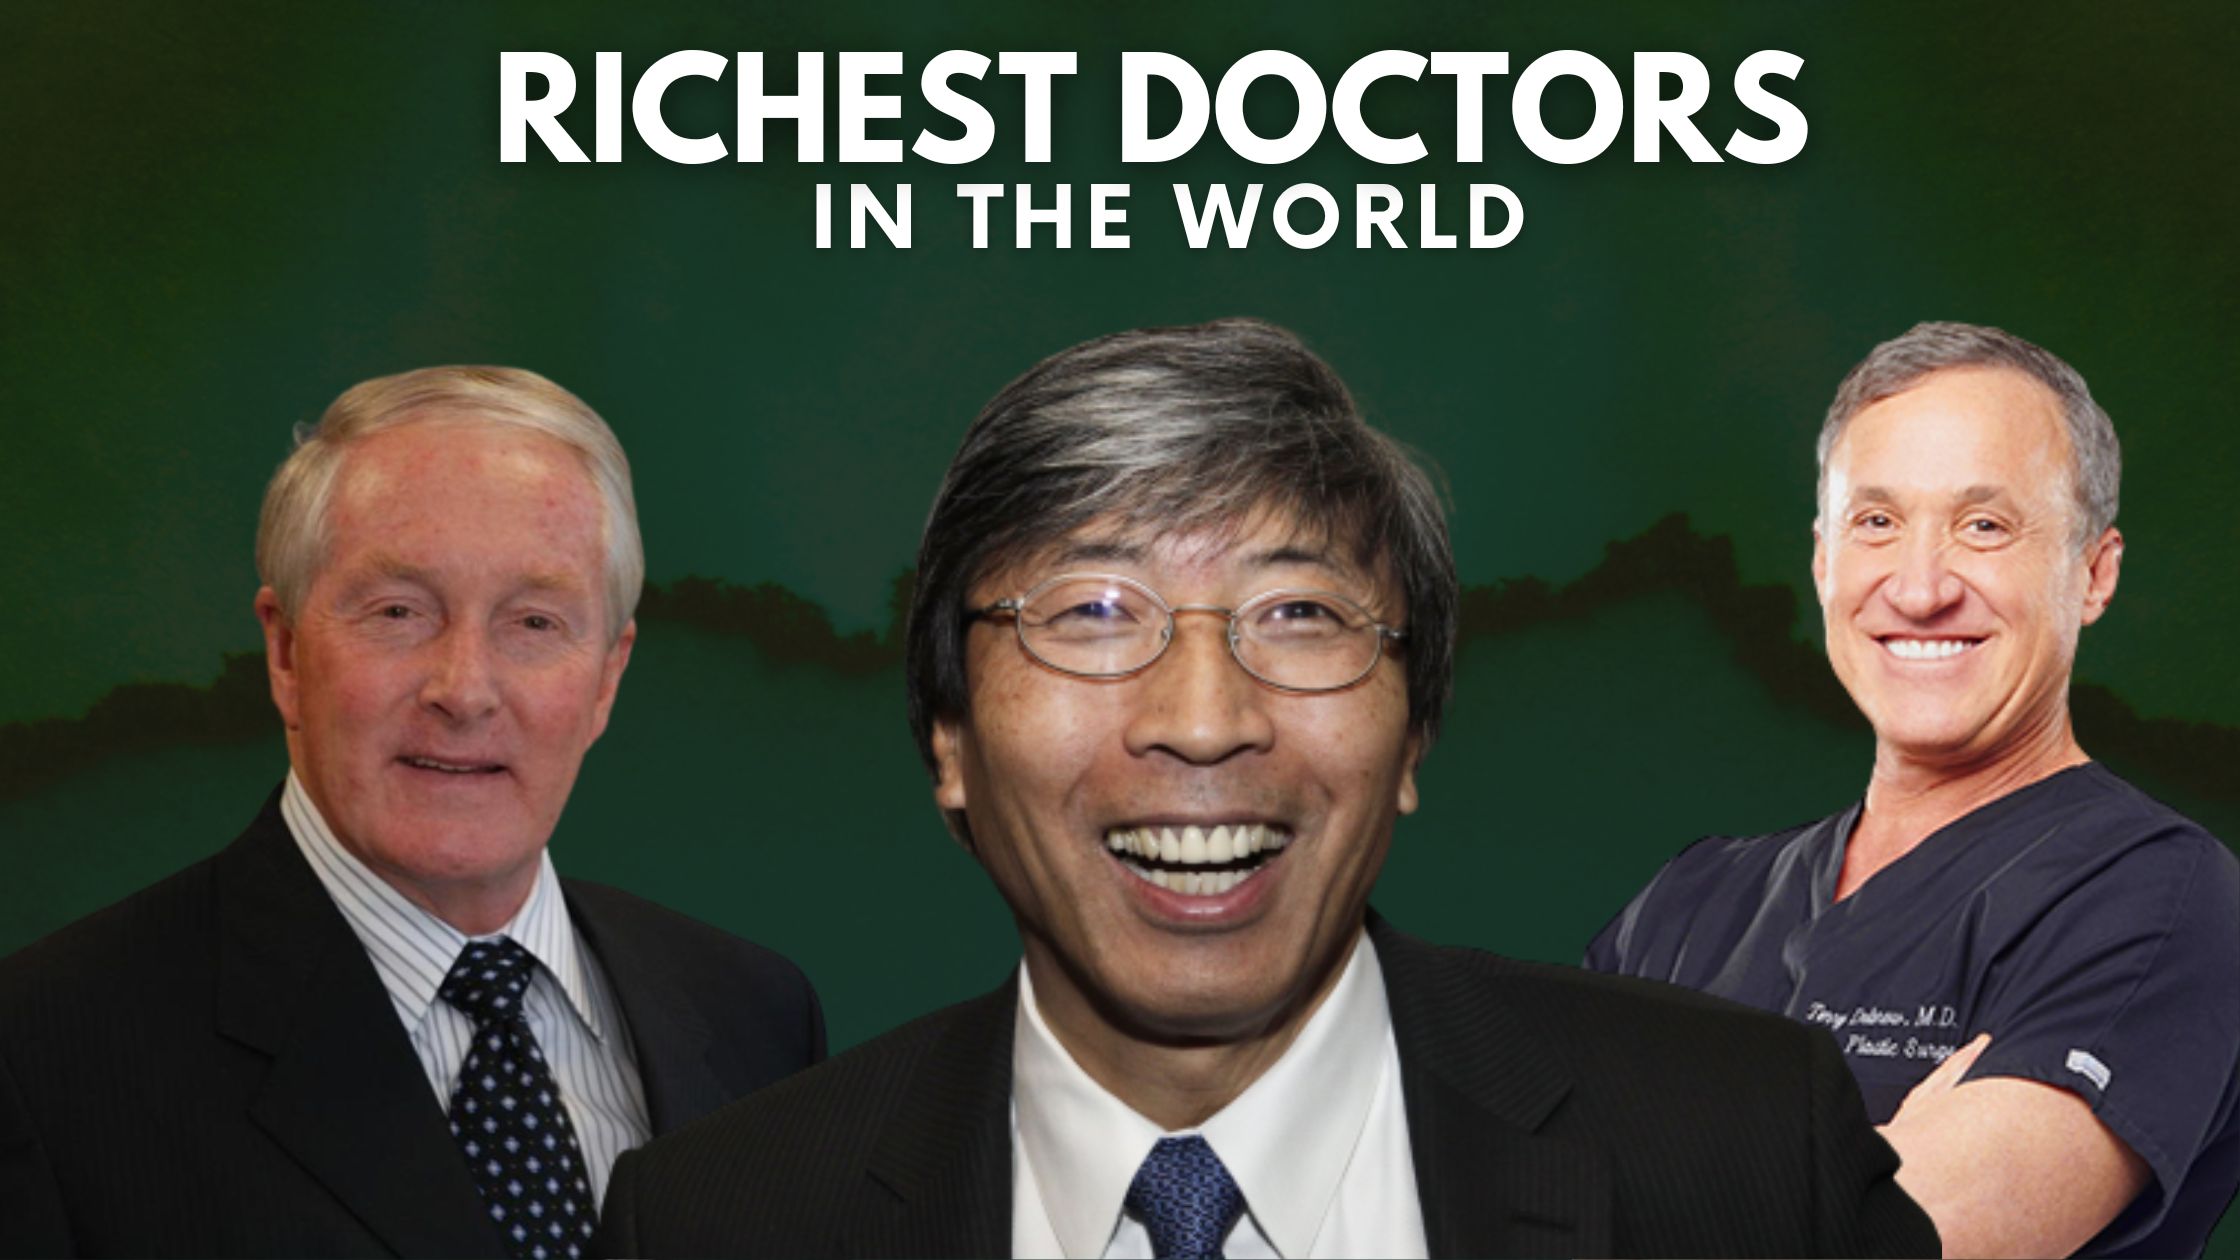 Top 10 Richest Doctors In The World 2022